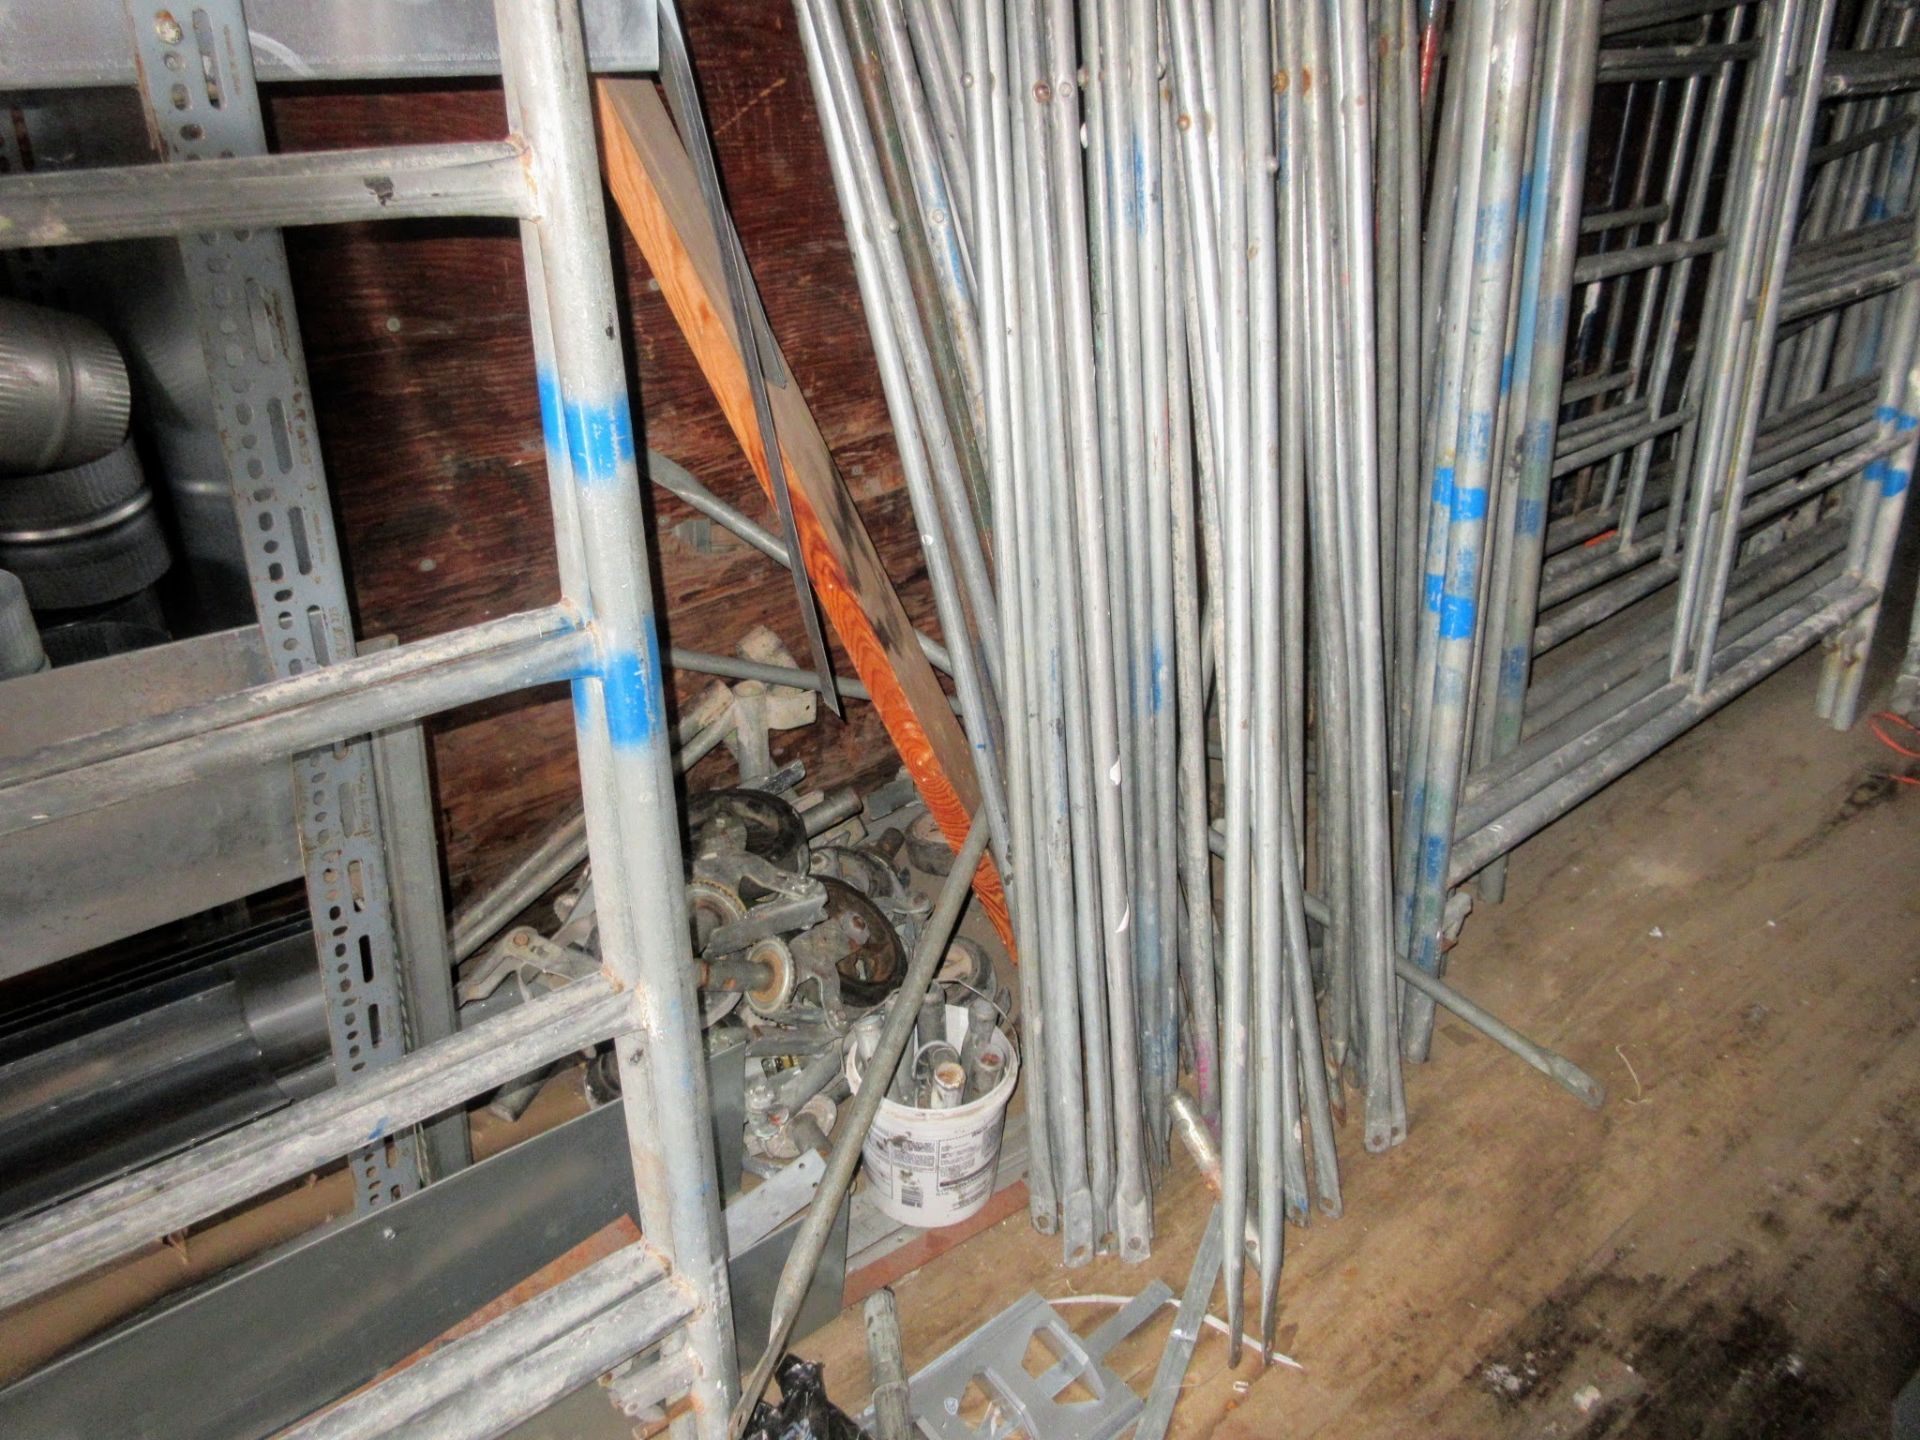 LOT OF METALTECH SCAFFOLDING INCLUDING WHEELS, UPRIGHTS, PLATFORMS, POLES, ETC. - Image 3 of 3